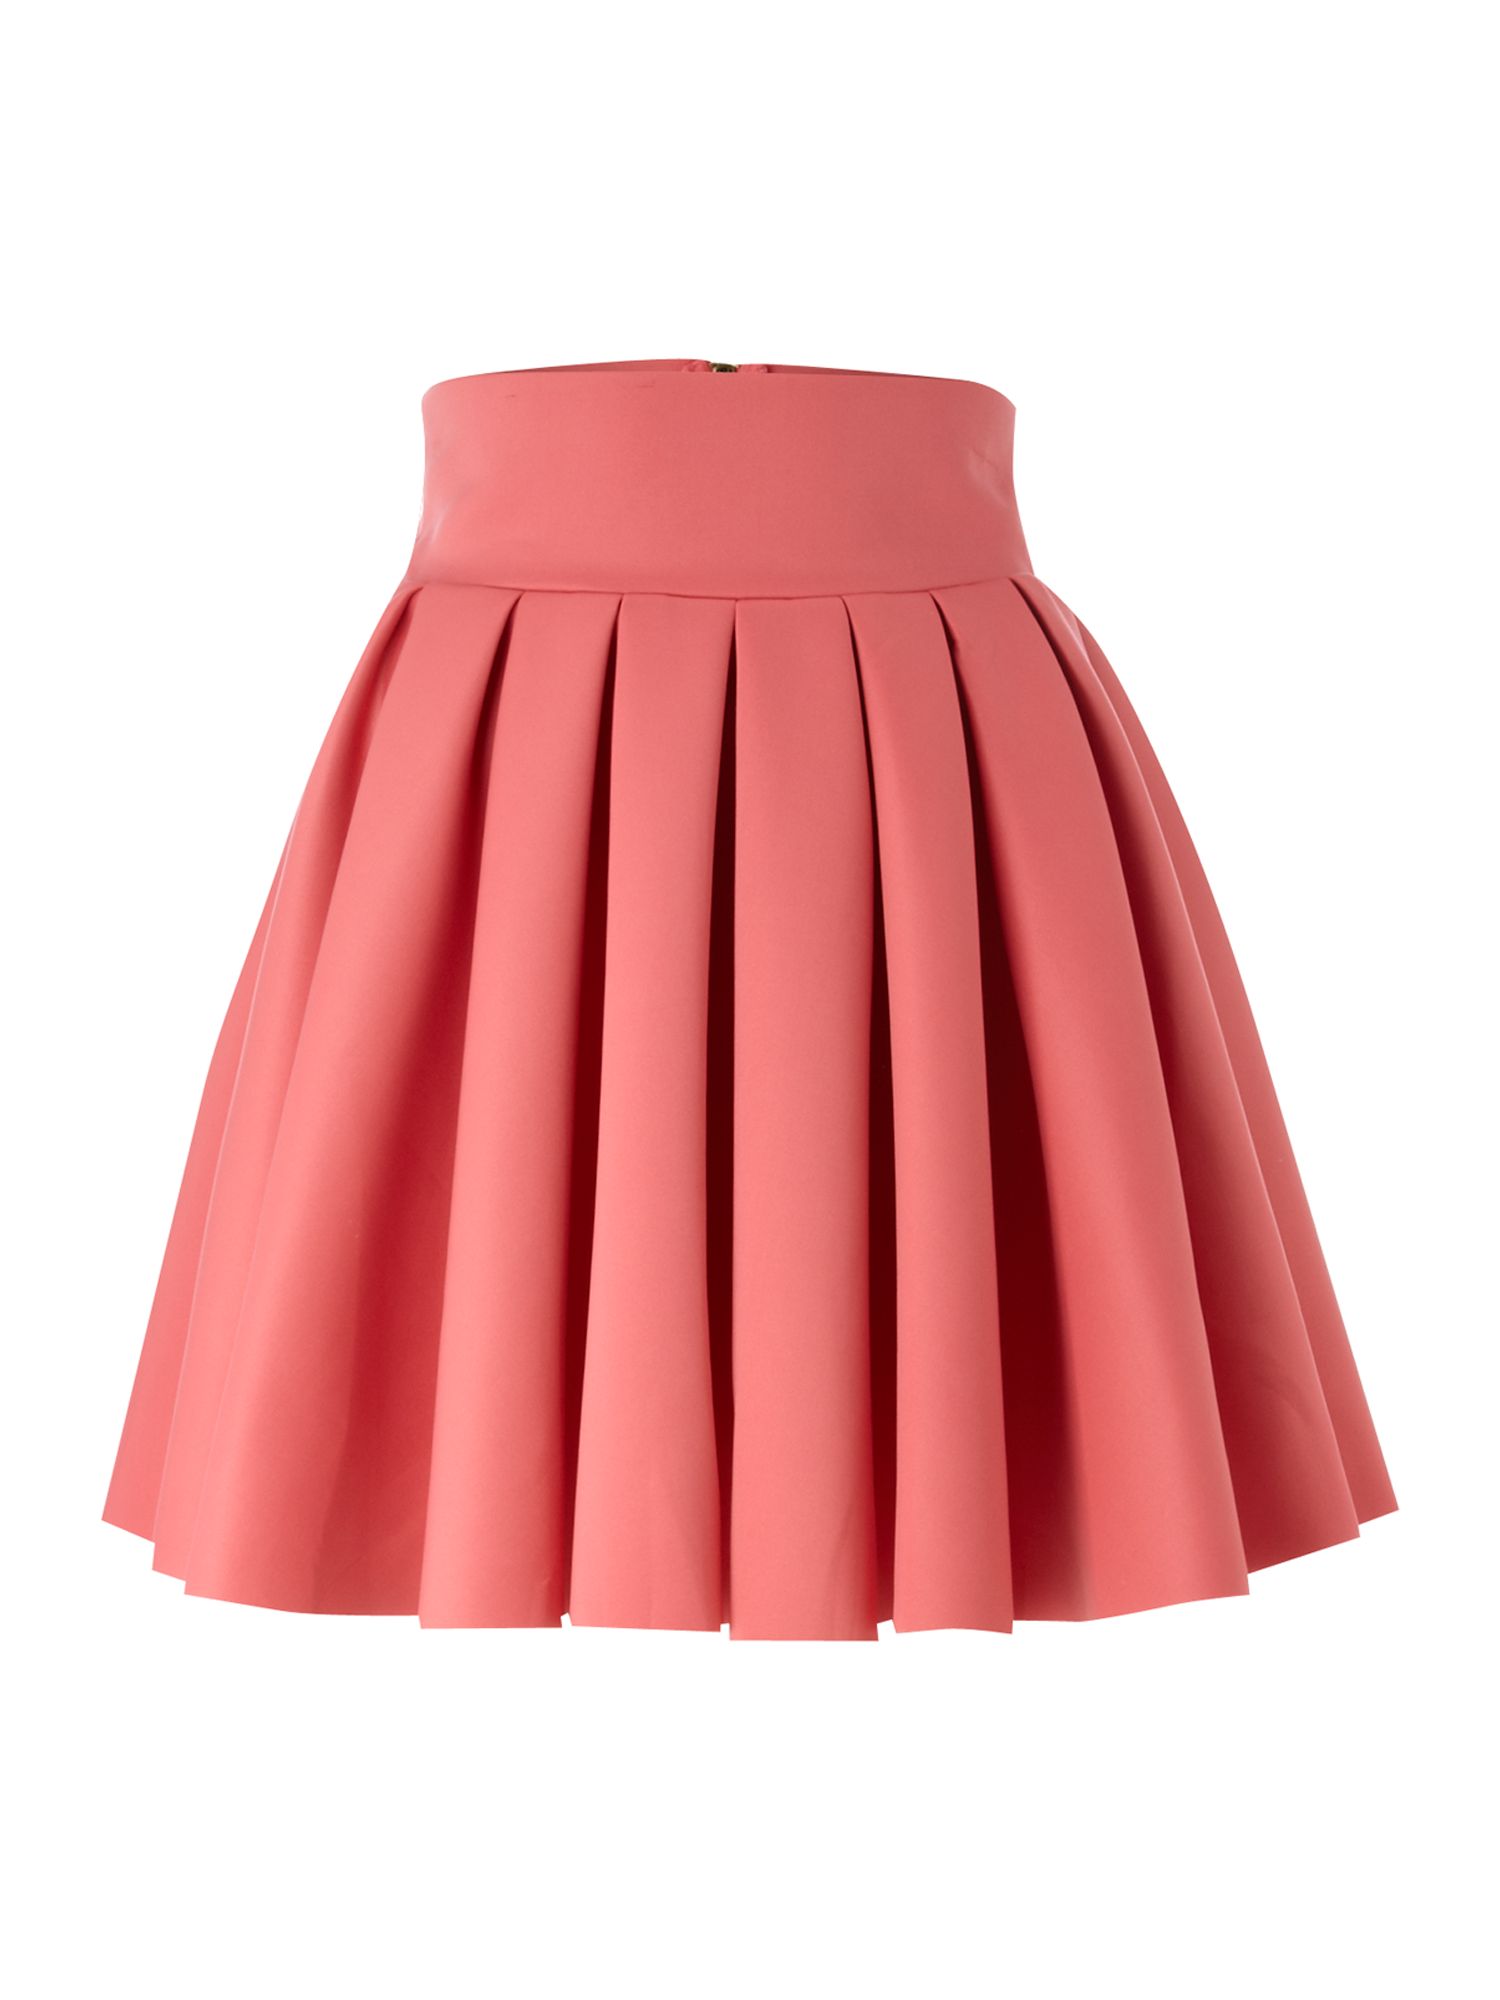 Tfnc london Flared Skirt in Pink | Lyst